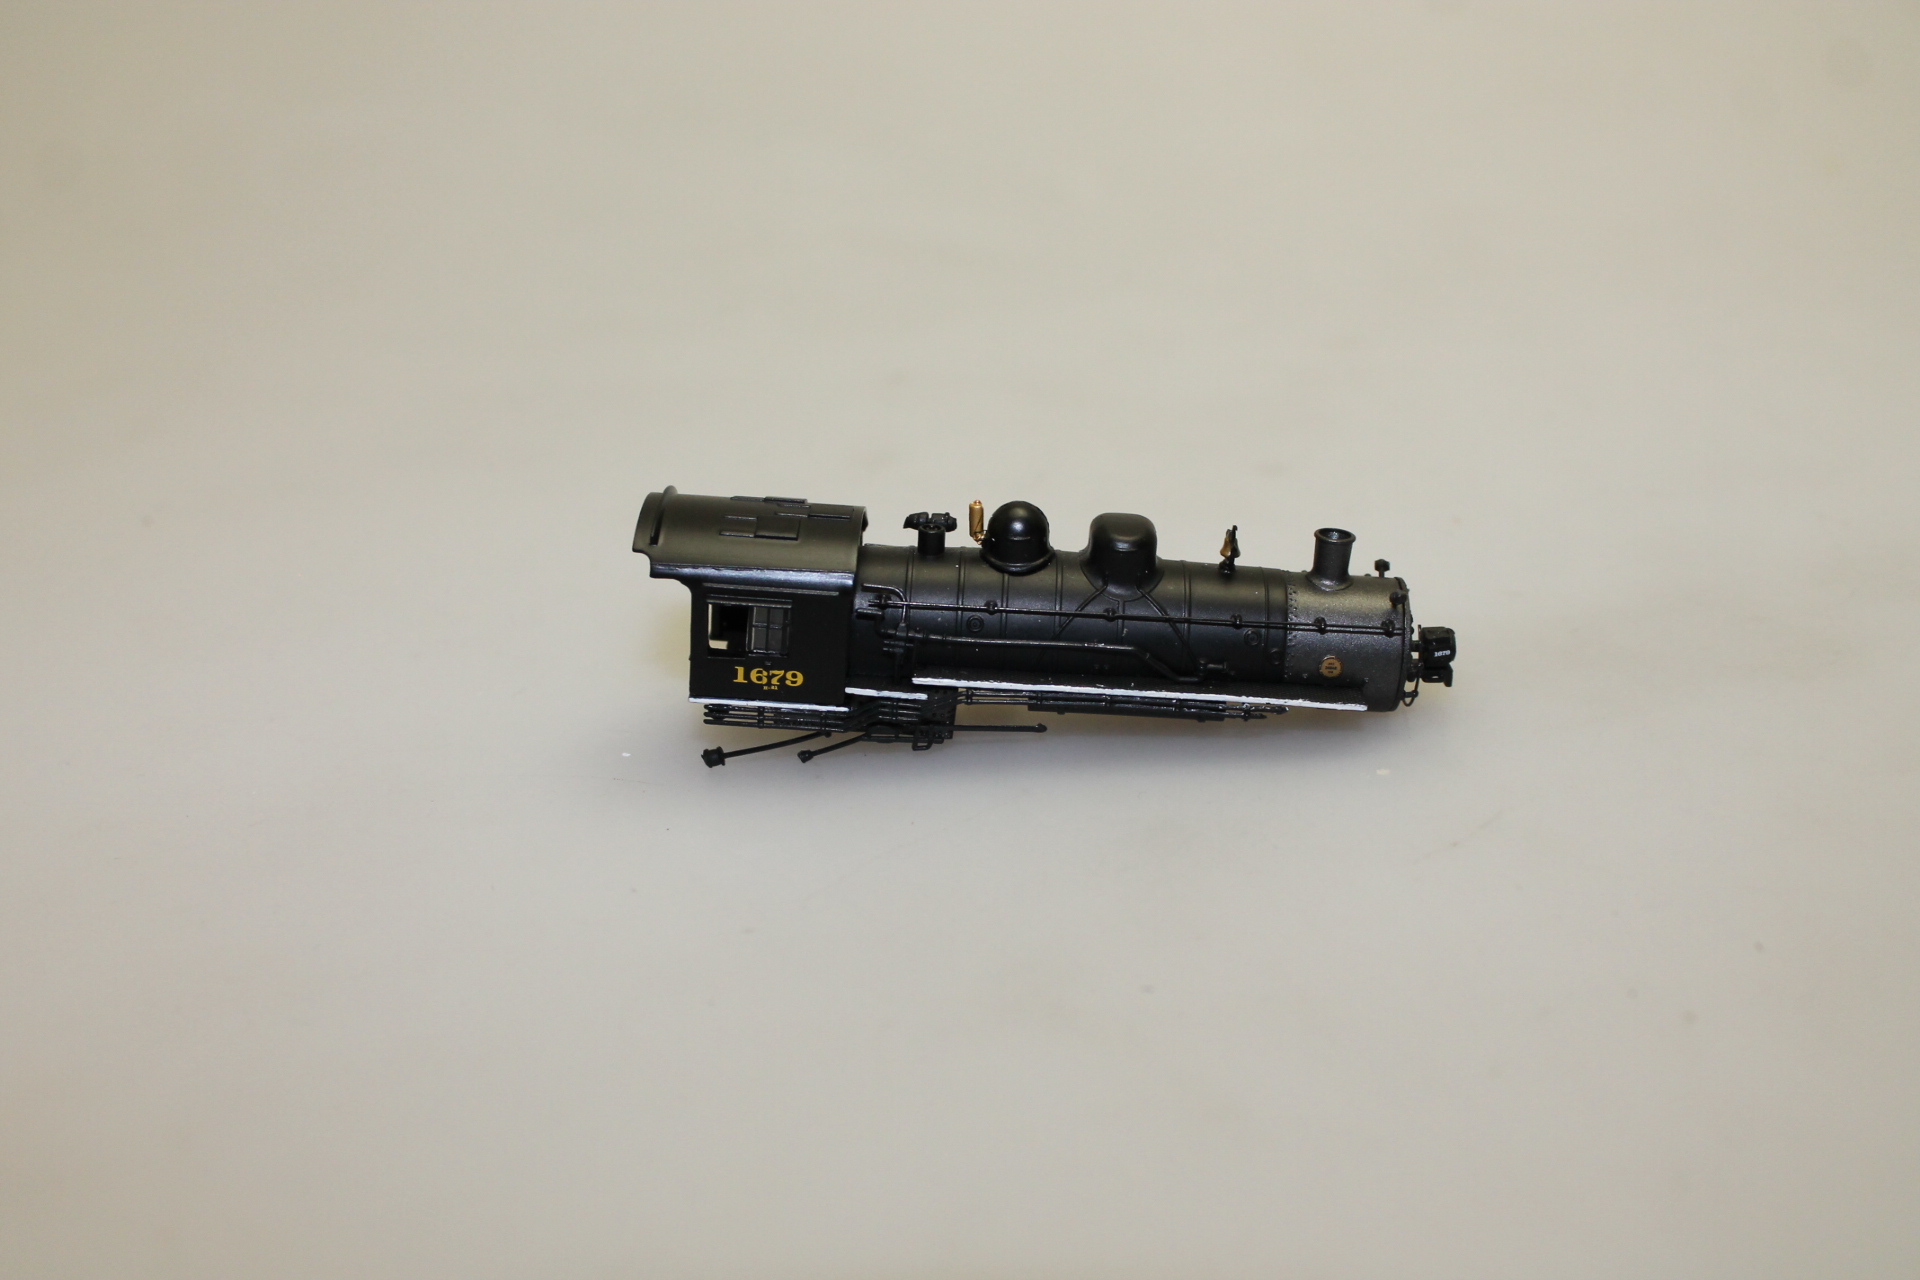 Loco Shell Erie #1679 (N Scale 2-8-0 DCC READY)